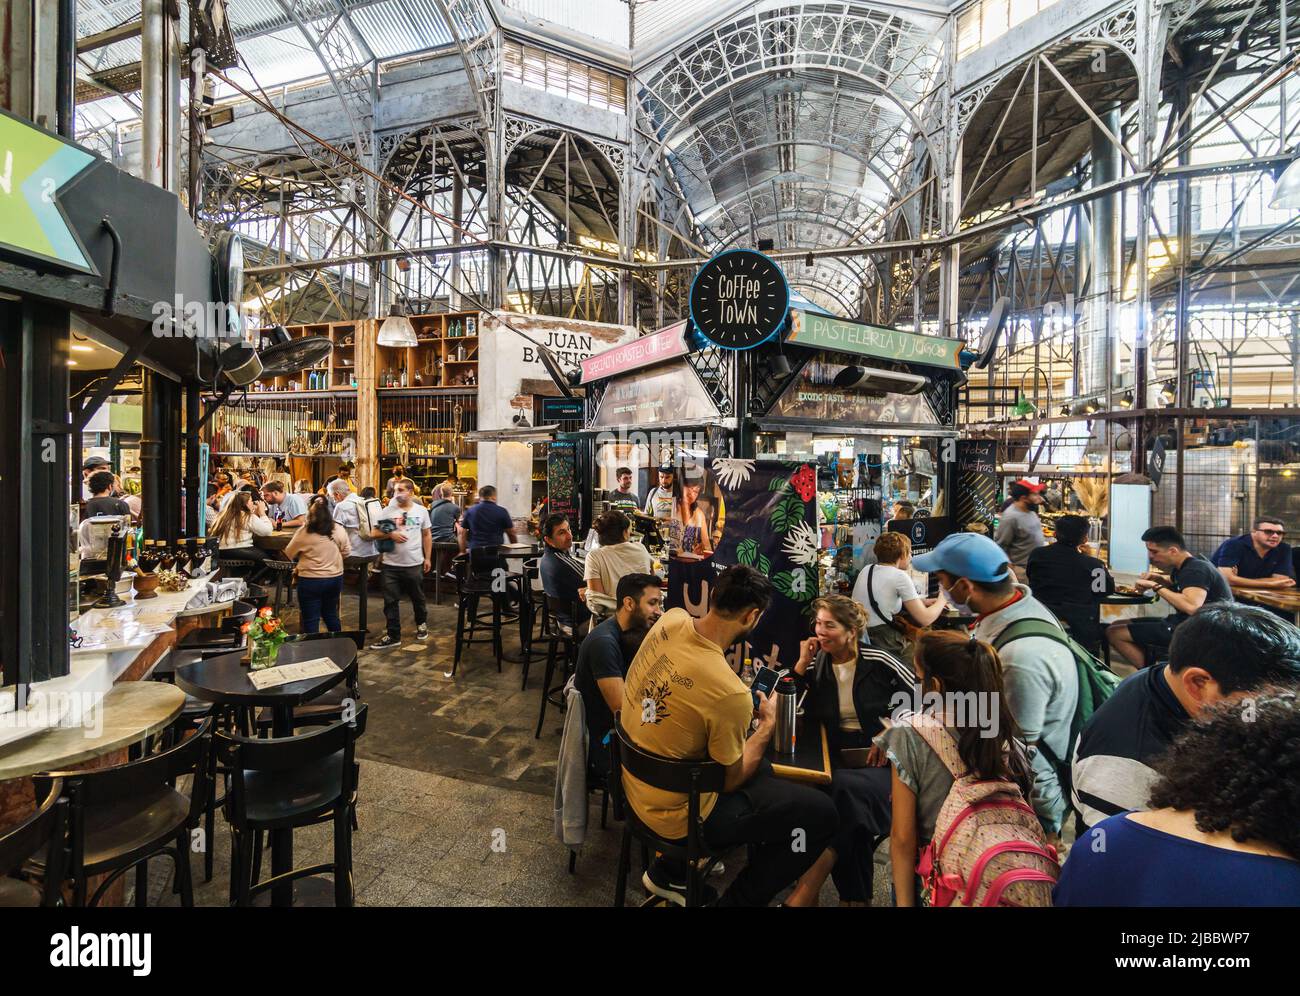 Buenos Aires, Argentina - March 20 2022: People eat in a restaurant in the famous San Telmo historic market food hall in Buenos Aires, Argentina capit Stock Photo